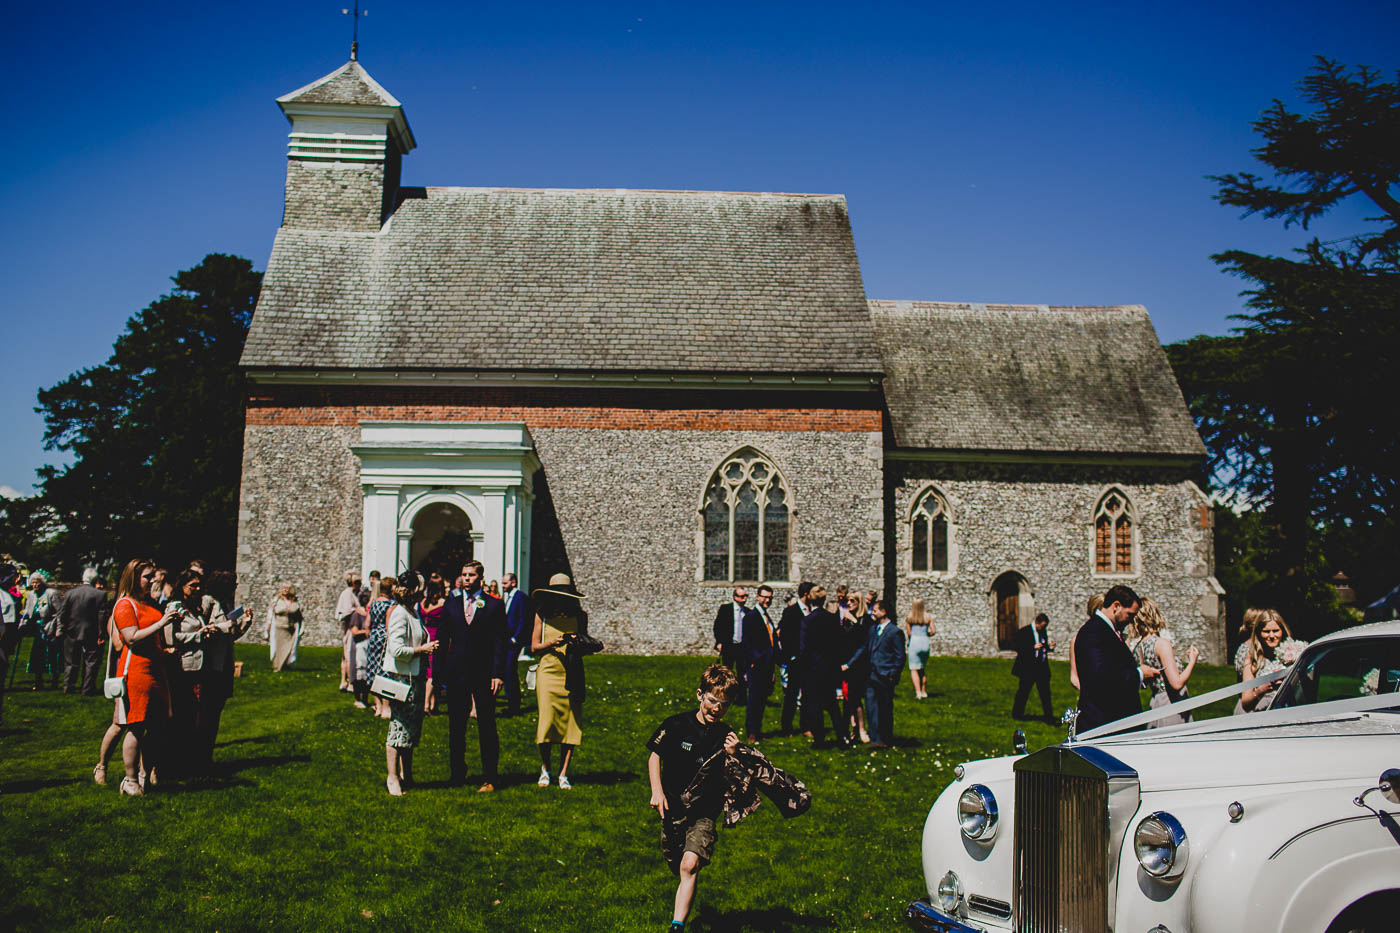 stbotolph's-lullingstone-The-Court-Lodge-wedding-49